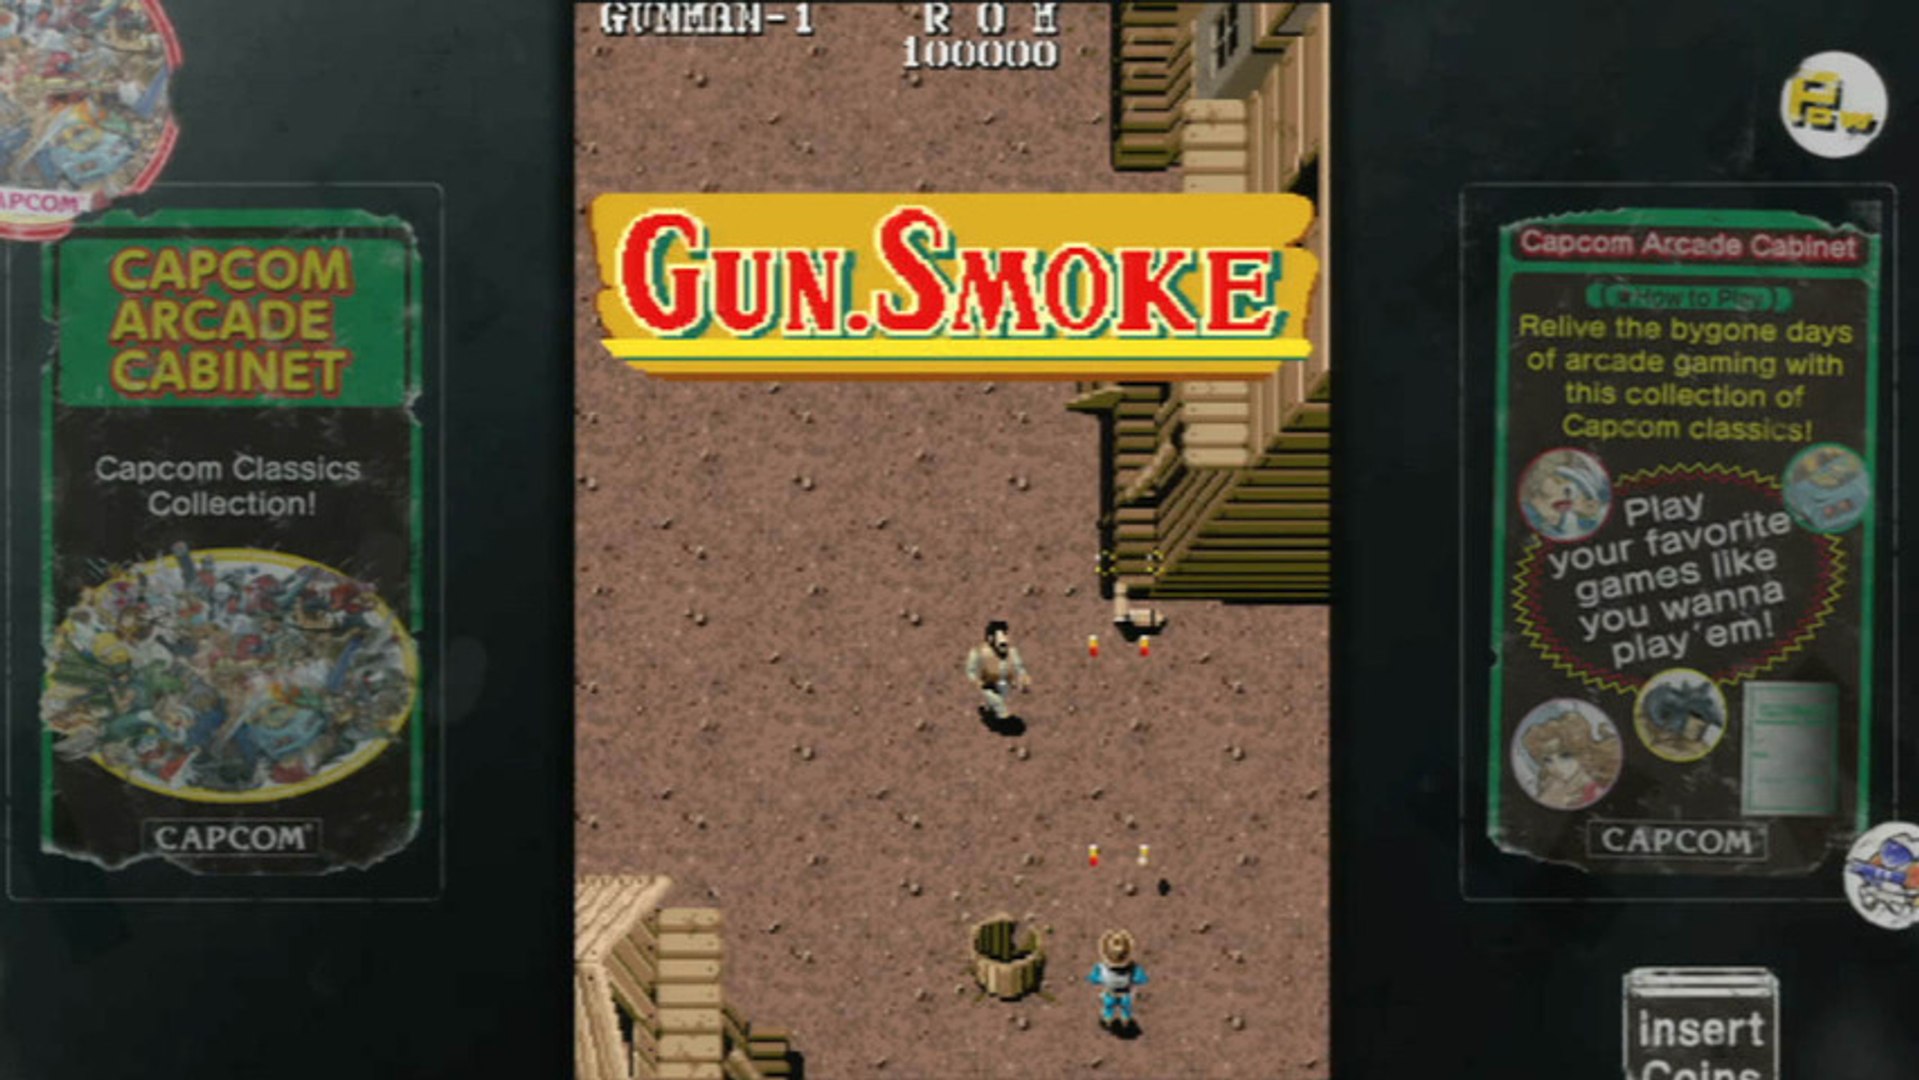 CGR Undertow - GUN.SMOKE (CAPCOM ARCADE CABINET) review for PlayStation 3 -  video Dailymotion